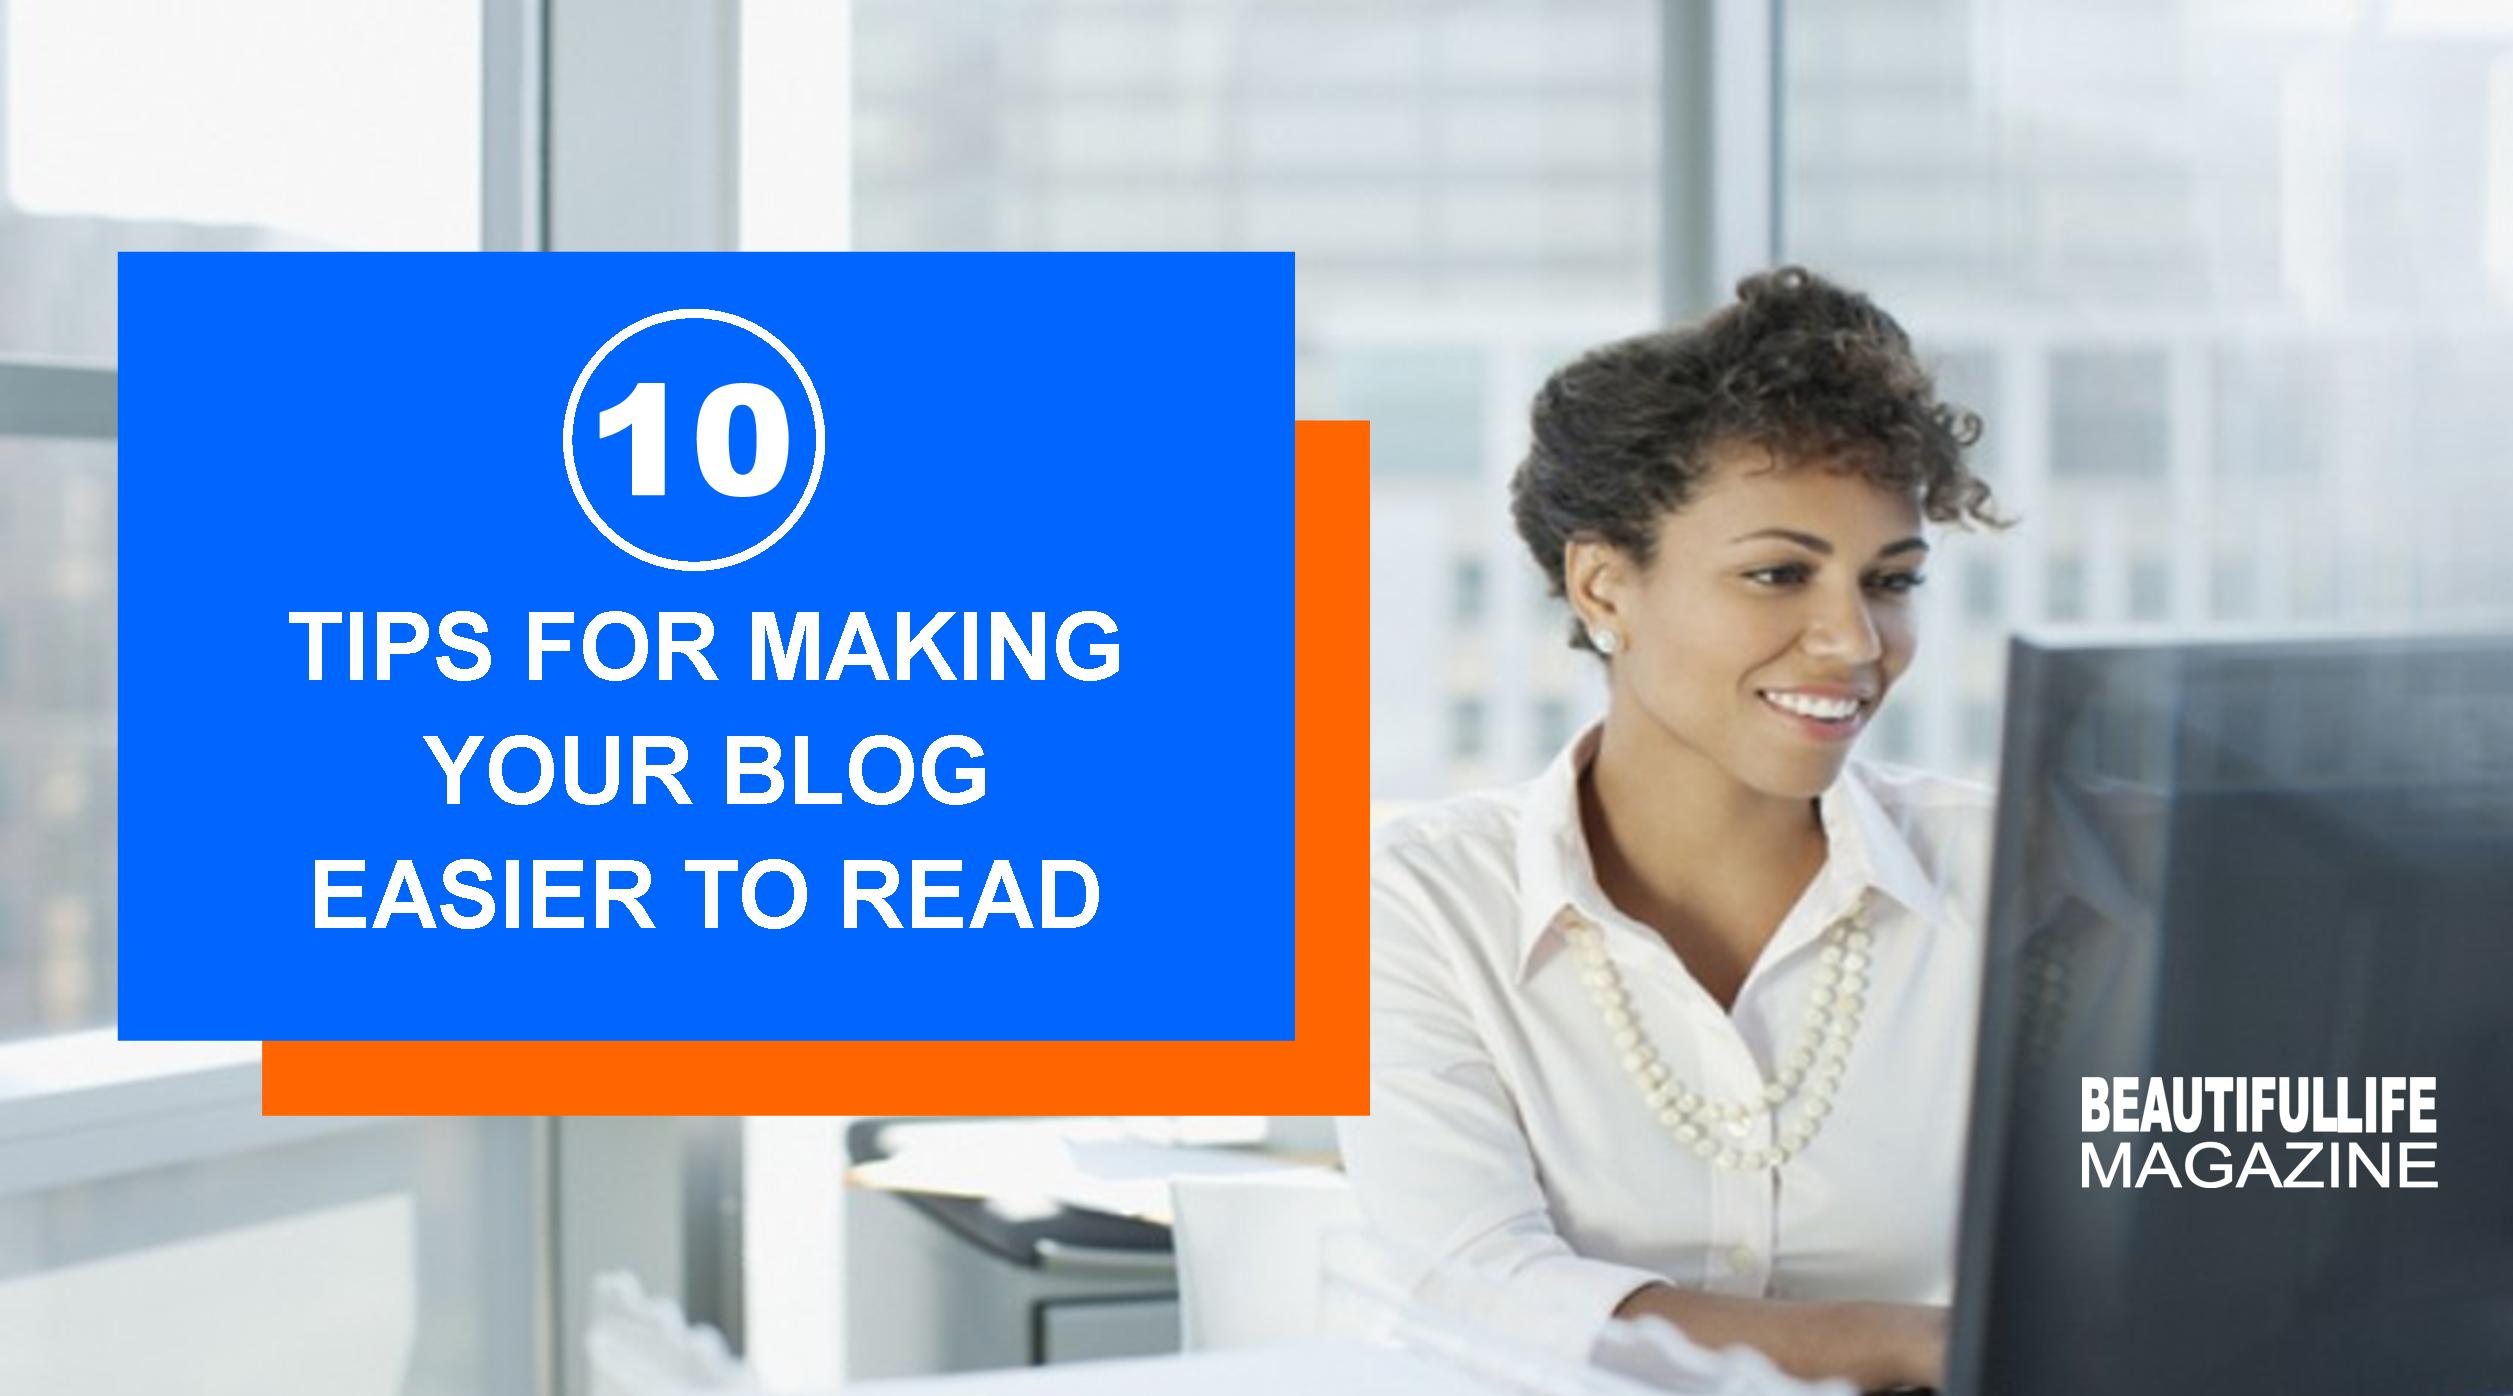 We have ten quick tips to help you improve your blog and make it easier to read and  help your readers easily understand your content and find information. These tips cover everything from design to formatting.